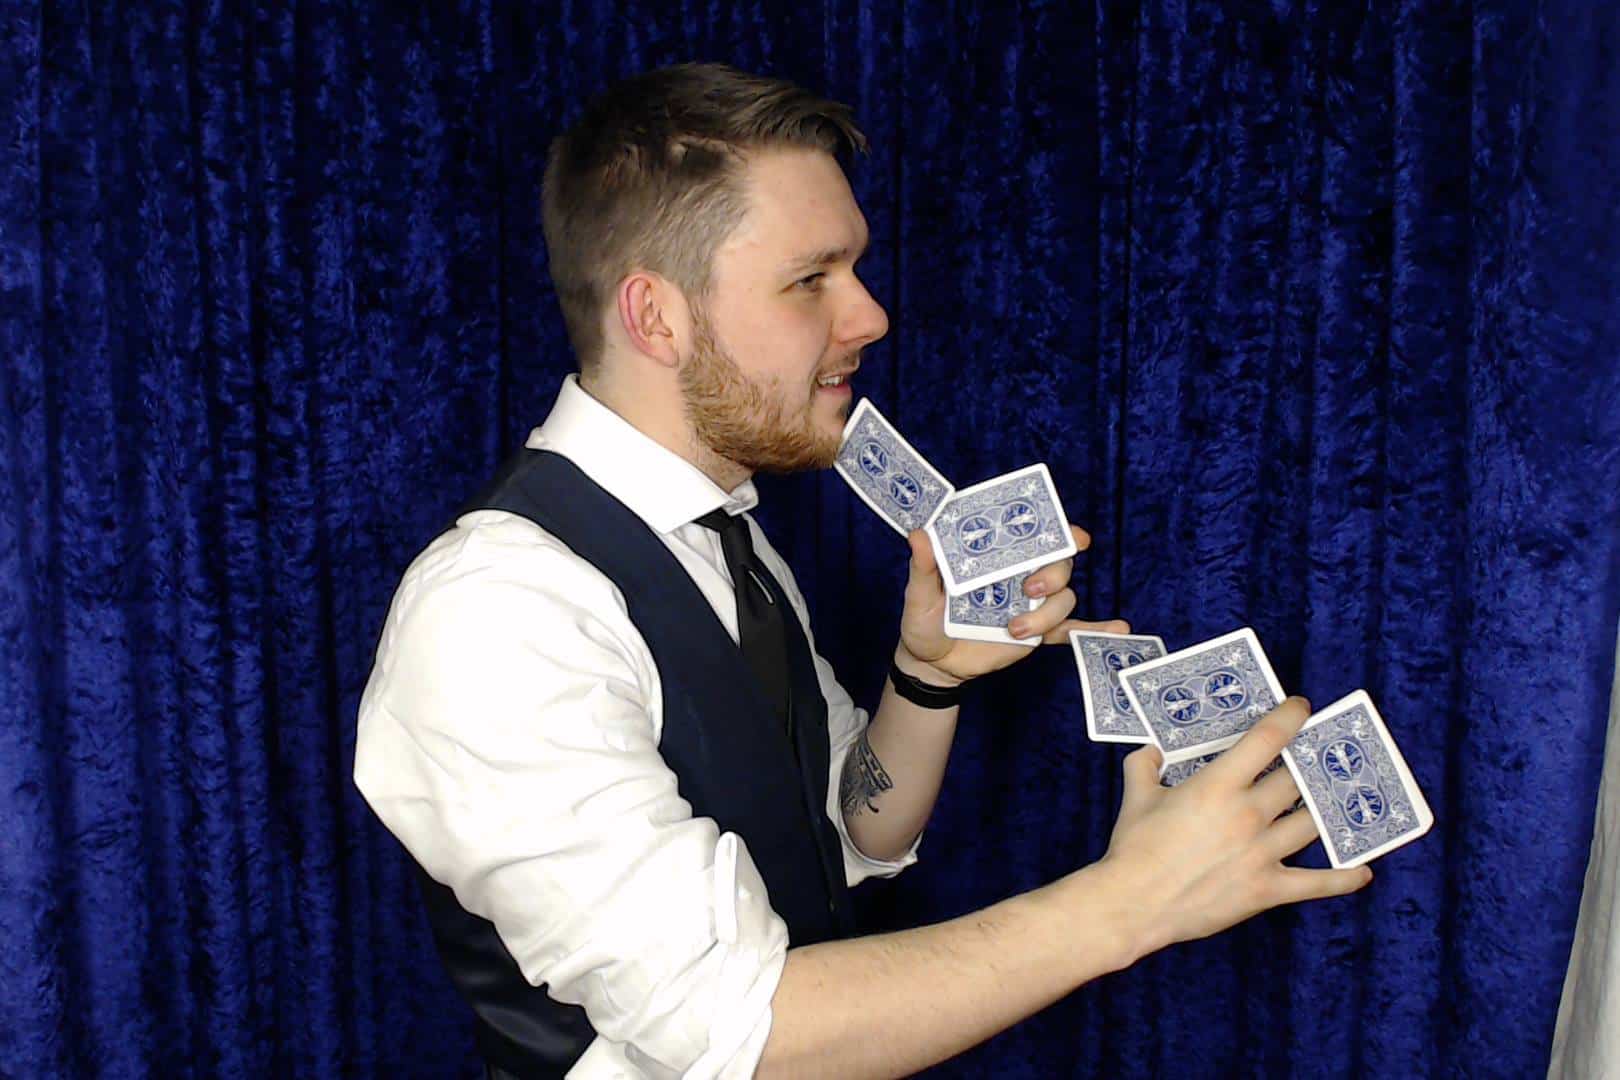 Professional Magician Showing Off With Cards In A PhotoBooth from Christmas Event!